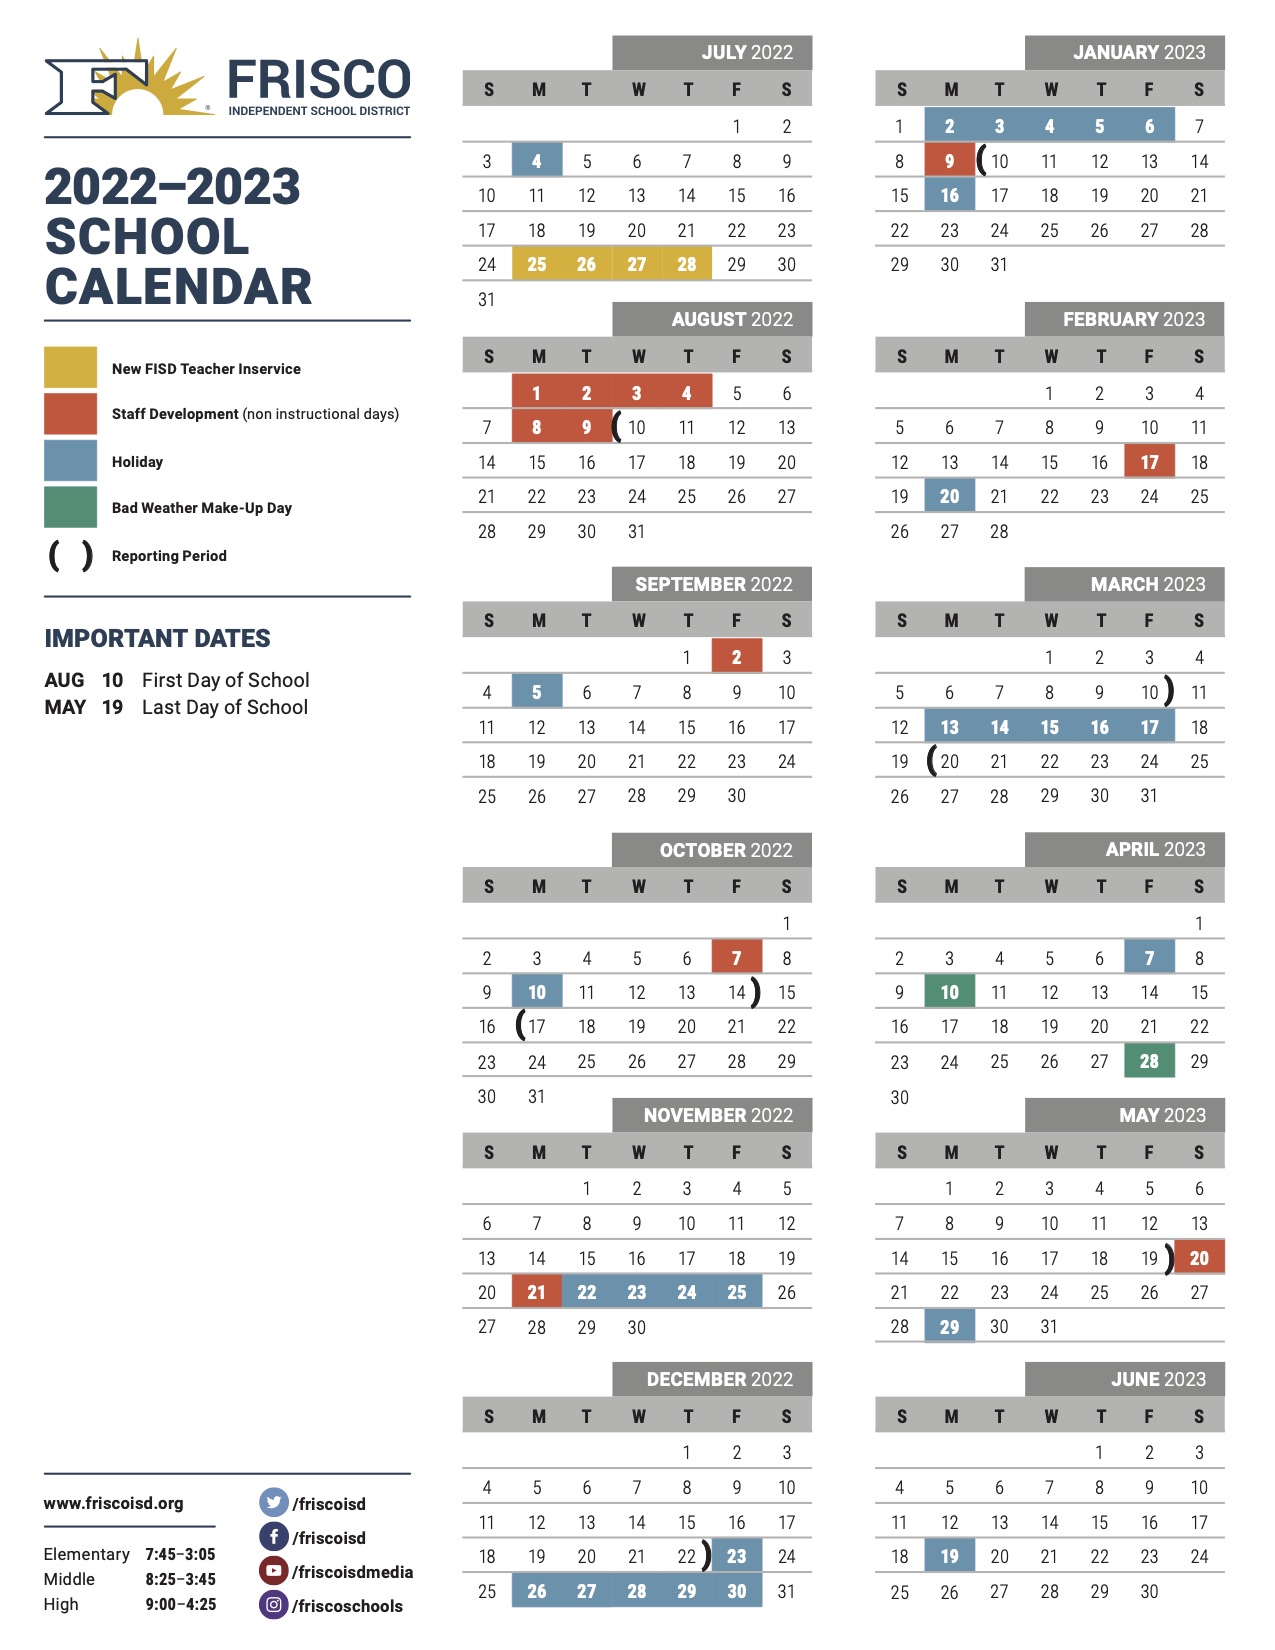 Frisco Isd Calendar 2022 23 Frisco Isd On Twitter: "The Frisco Isd Academic Calendar Has Been Approved  For The 2022-23 School Year. Check Out Https://T.co/Jlvoekeccp For An  Overview Of The Calendar. Https://T.co/C8Gs8Lflru" / Twitter